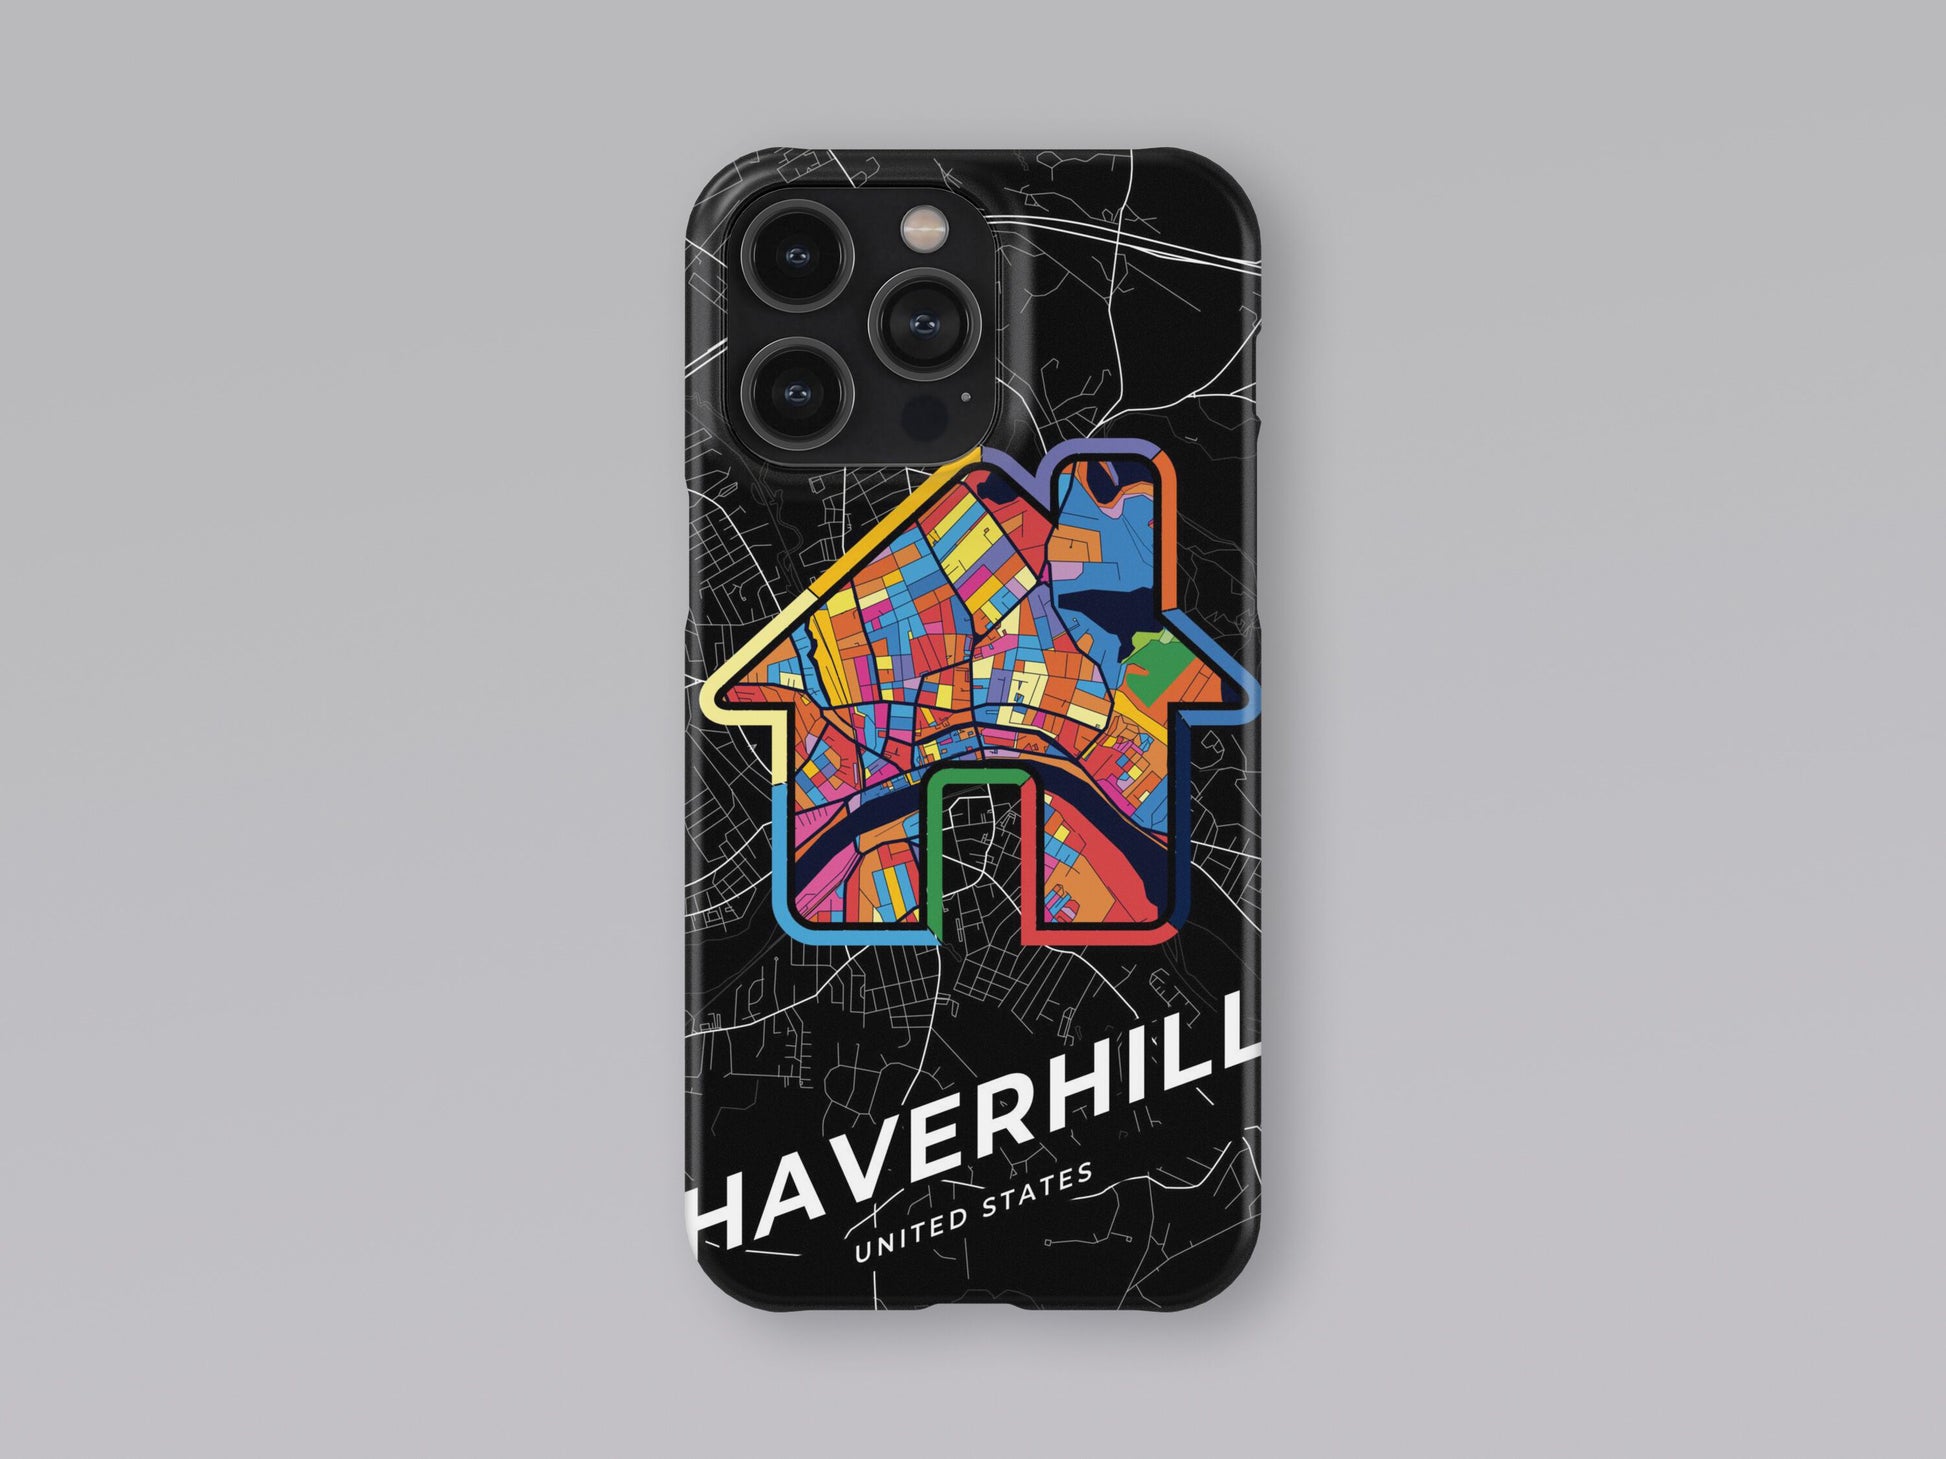 Haverhill Massachusetts slim phone case with colorful icon. Birthday, wedding or housewarming gift. Couple match cases. 3